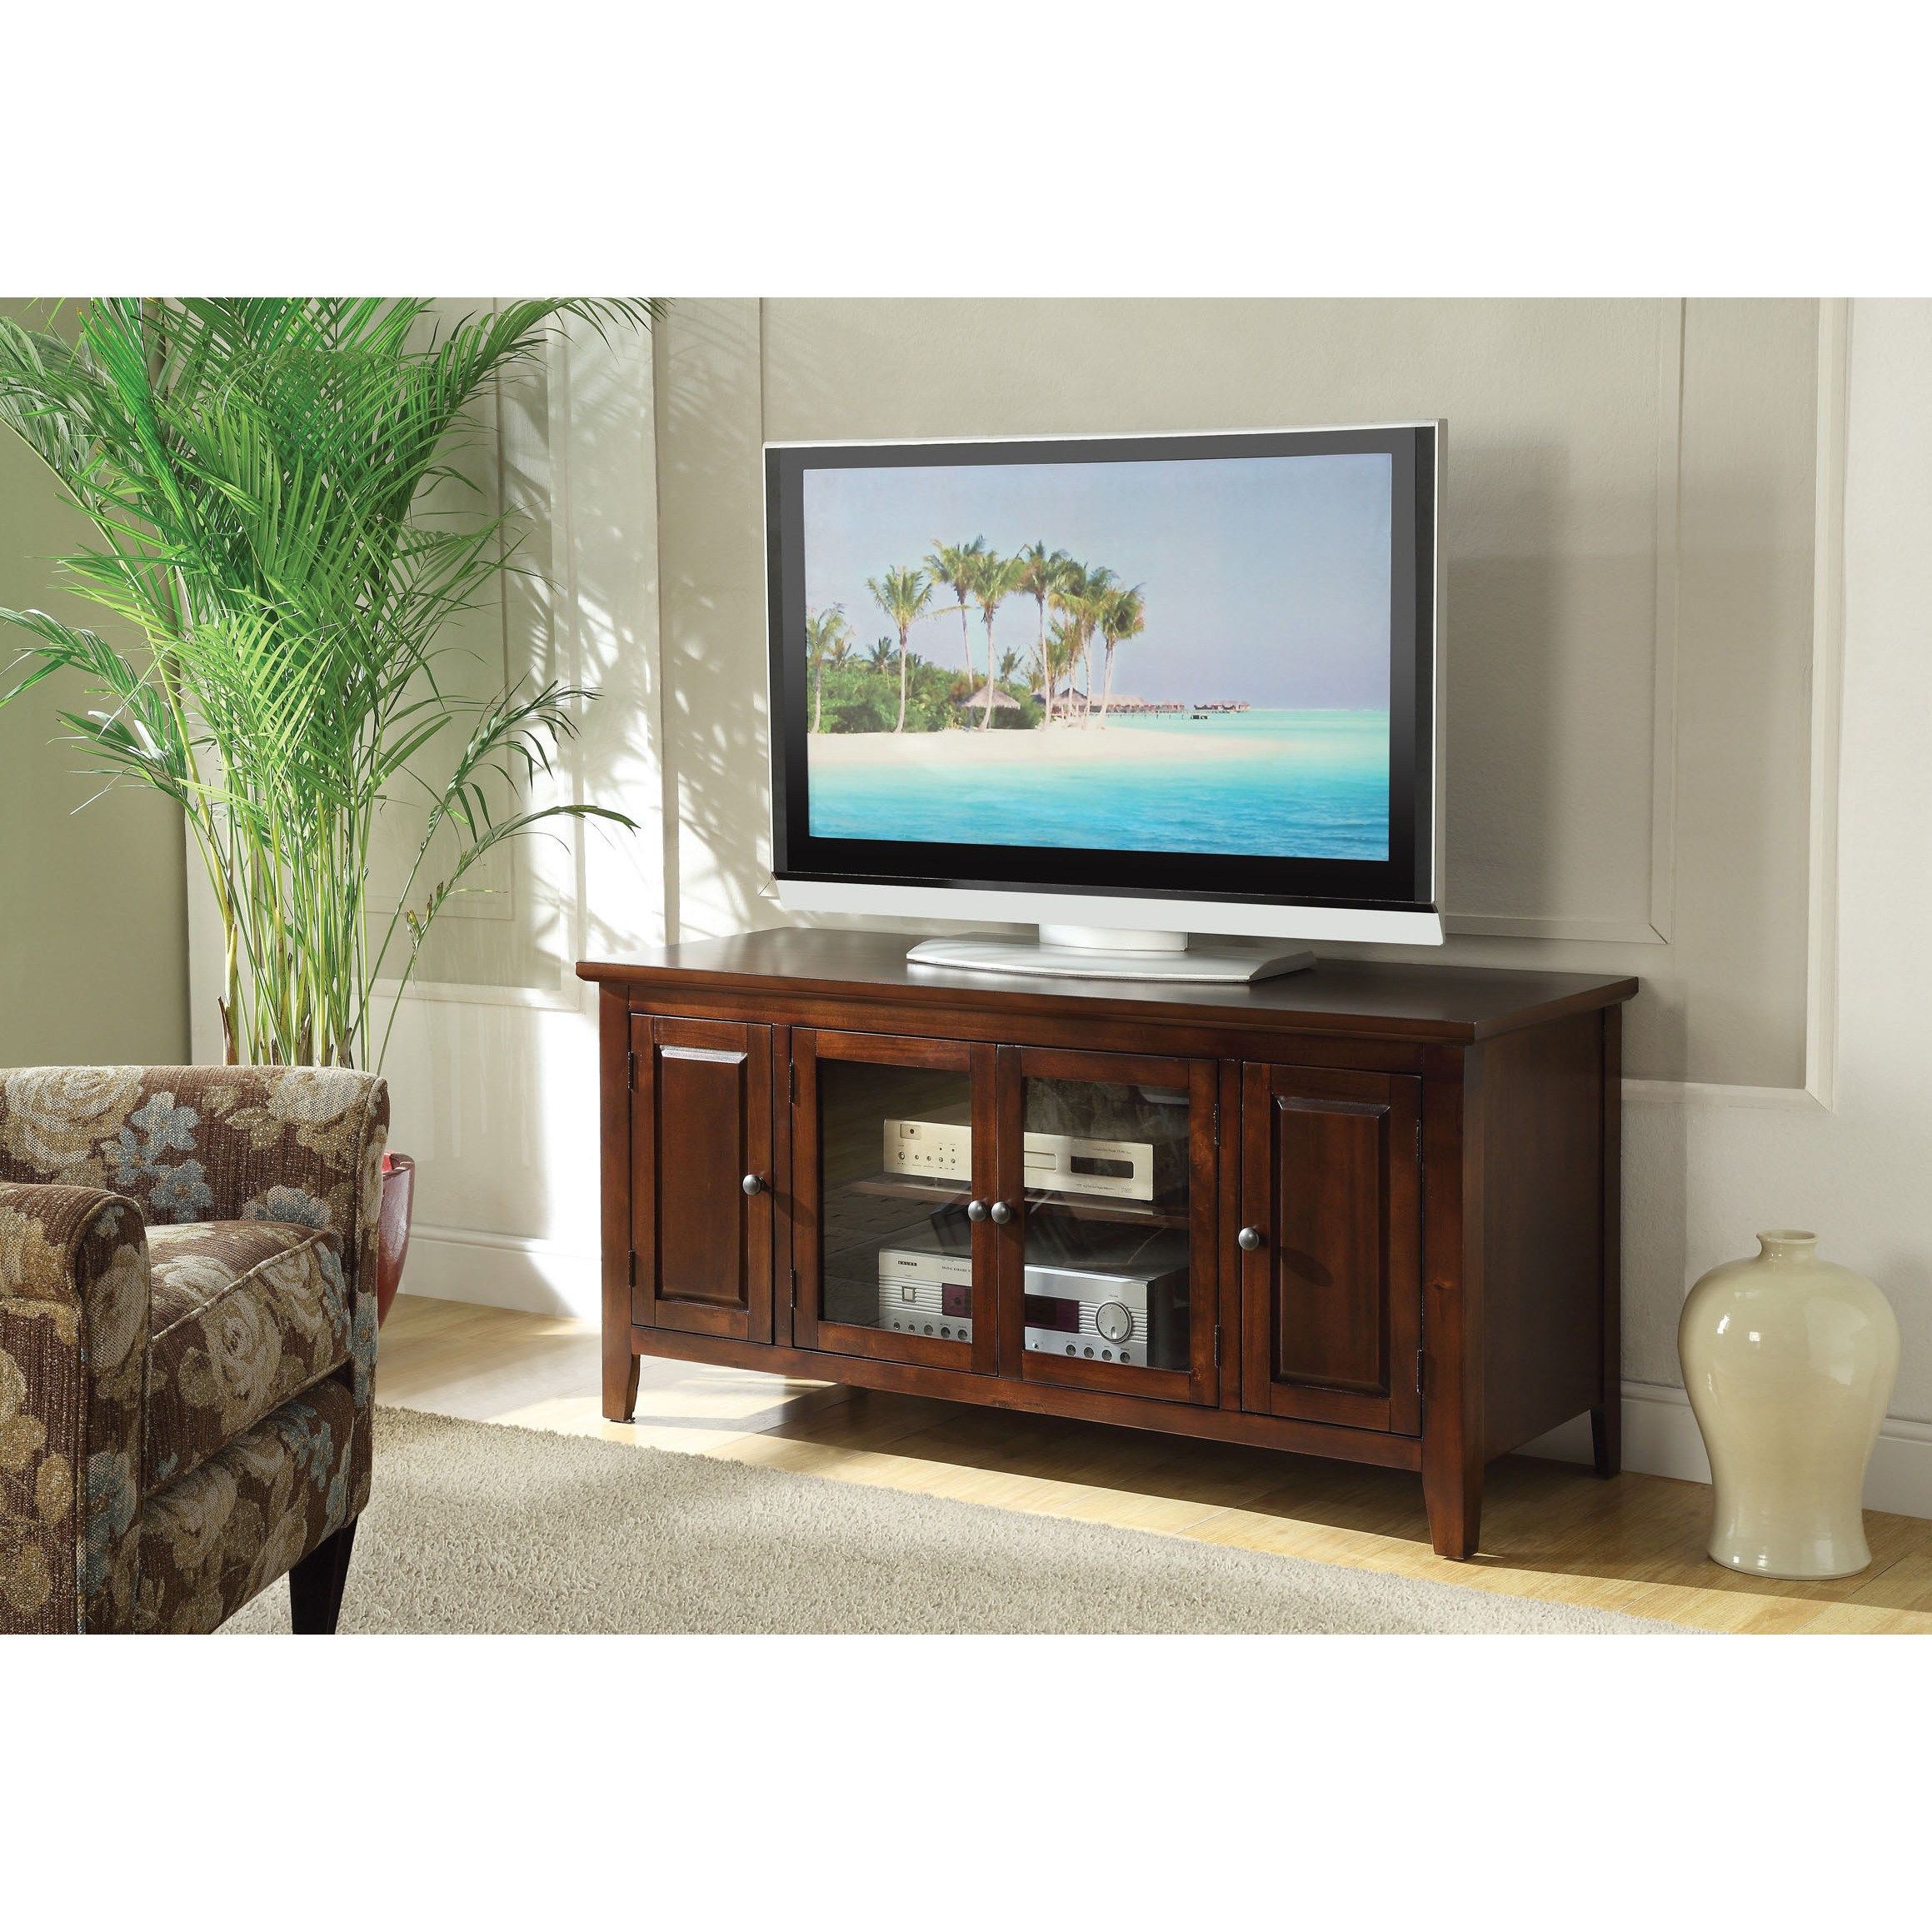 Acme Christella Tv Stand For Flat Screen Tvs Up To 60 For Leafwood Tv Stands For Tvs Up To 60&quot; (View 14 of 15)